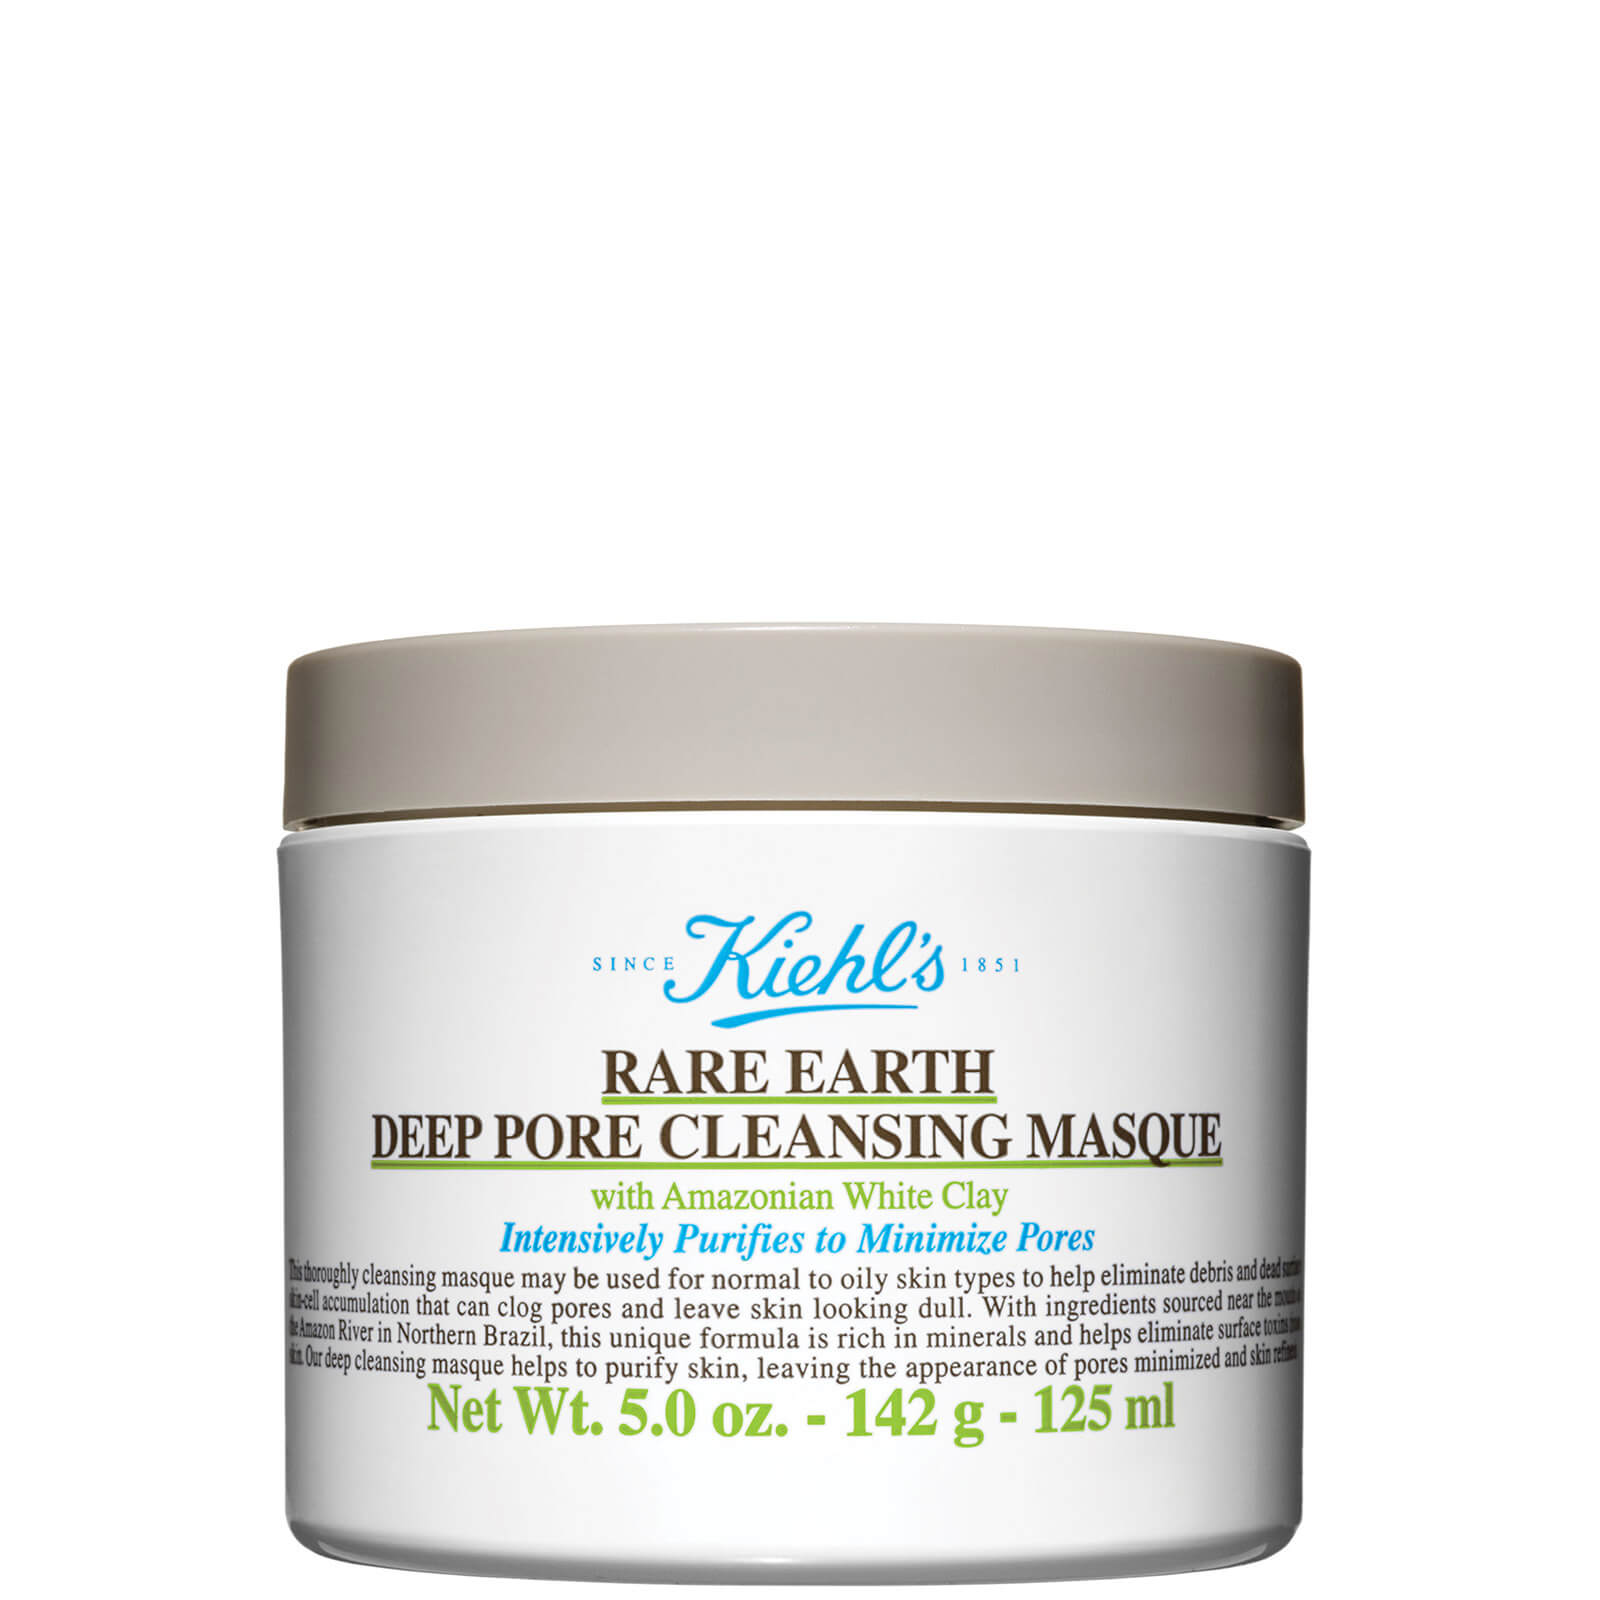 Image of Kiehl's Rare Earth Deep Pore Cleansing Masque 125ml